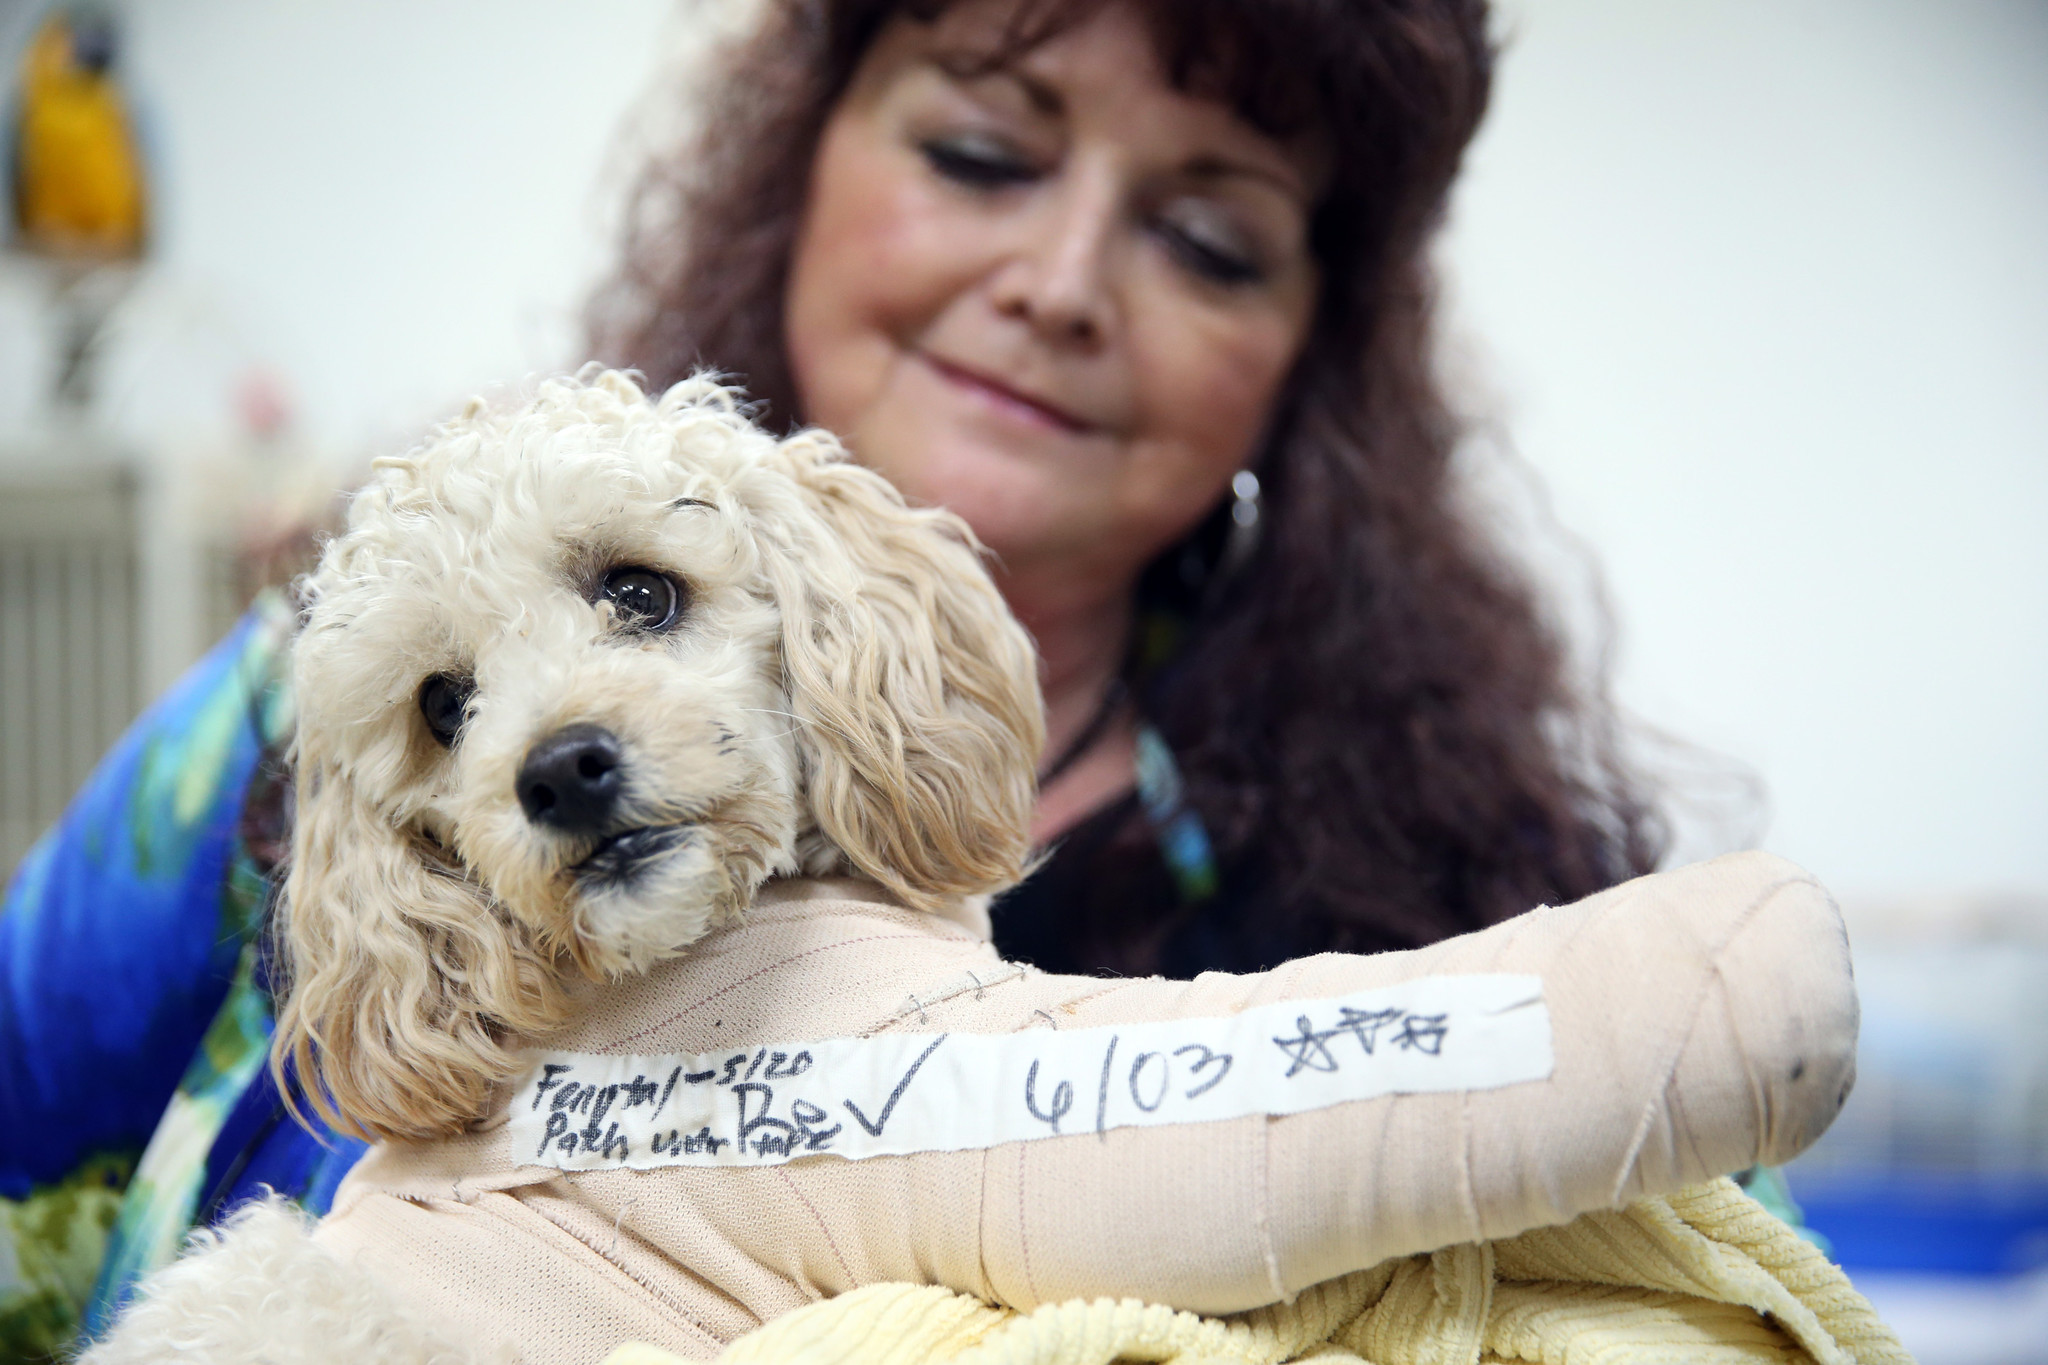 Listen to the 911 call hospital security placed for poodles dropped from parking deck